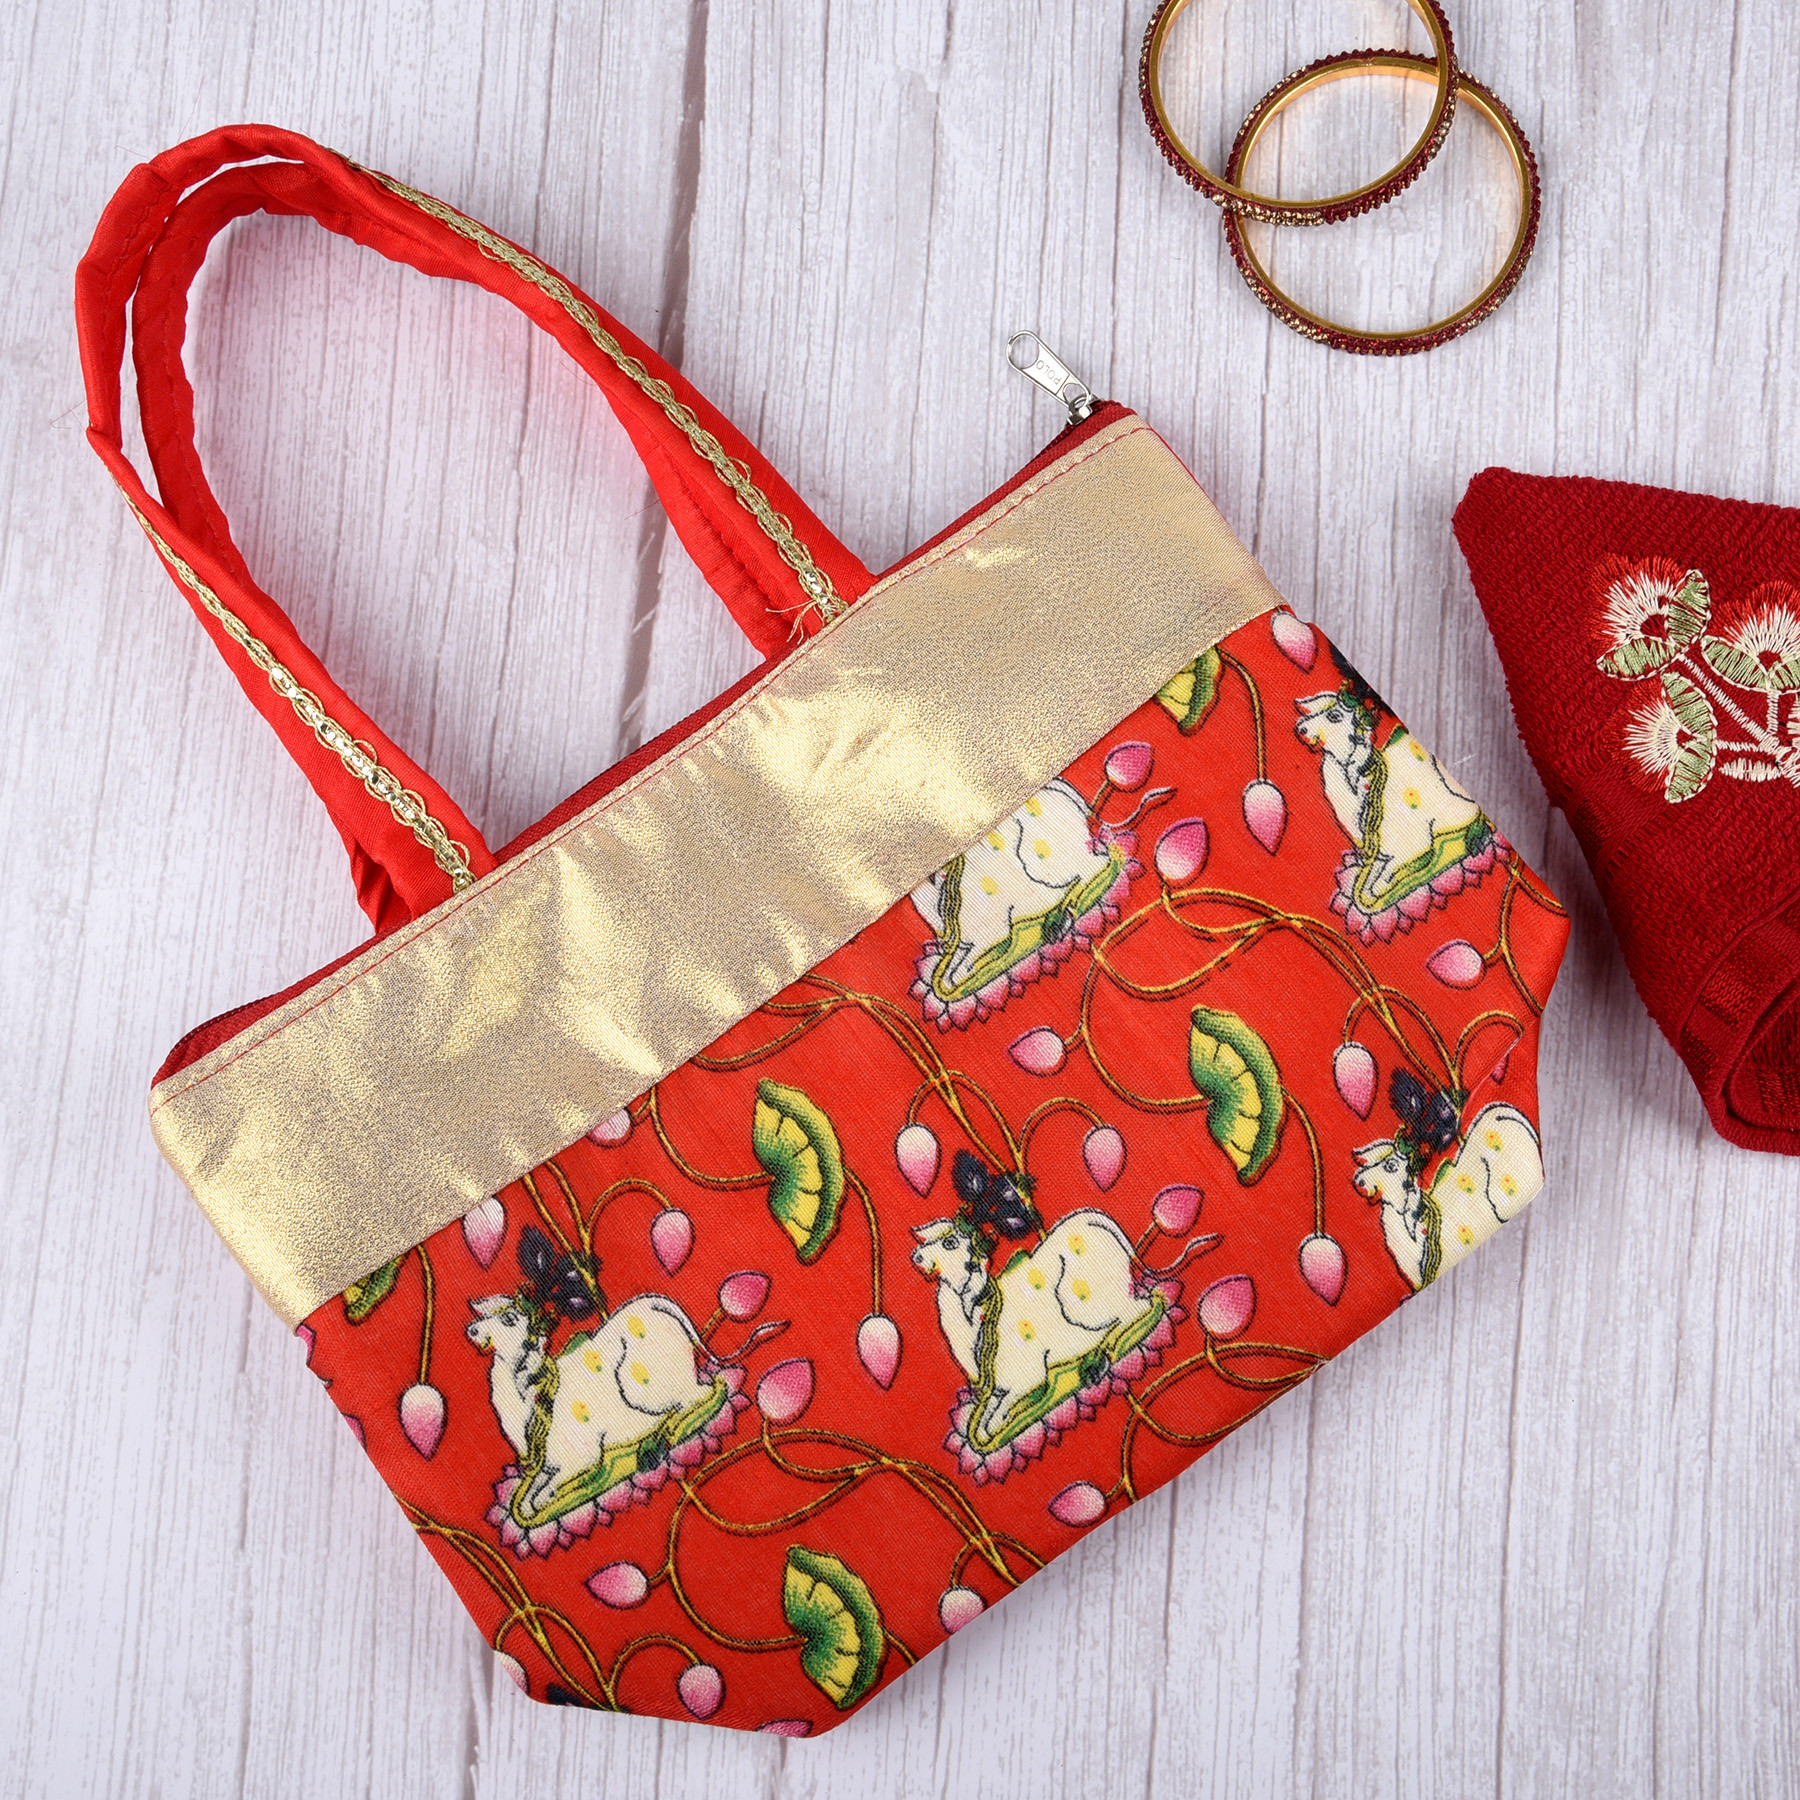 Kuber Industries Hand Purse | Traditional Mini Hand Bag | Silk Wallet Hand Bag | Shagun Hand Purse | Woman Tote Hand Bag | Gifts Hand Bag | Cow-Small Hand Purse |Red